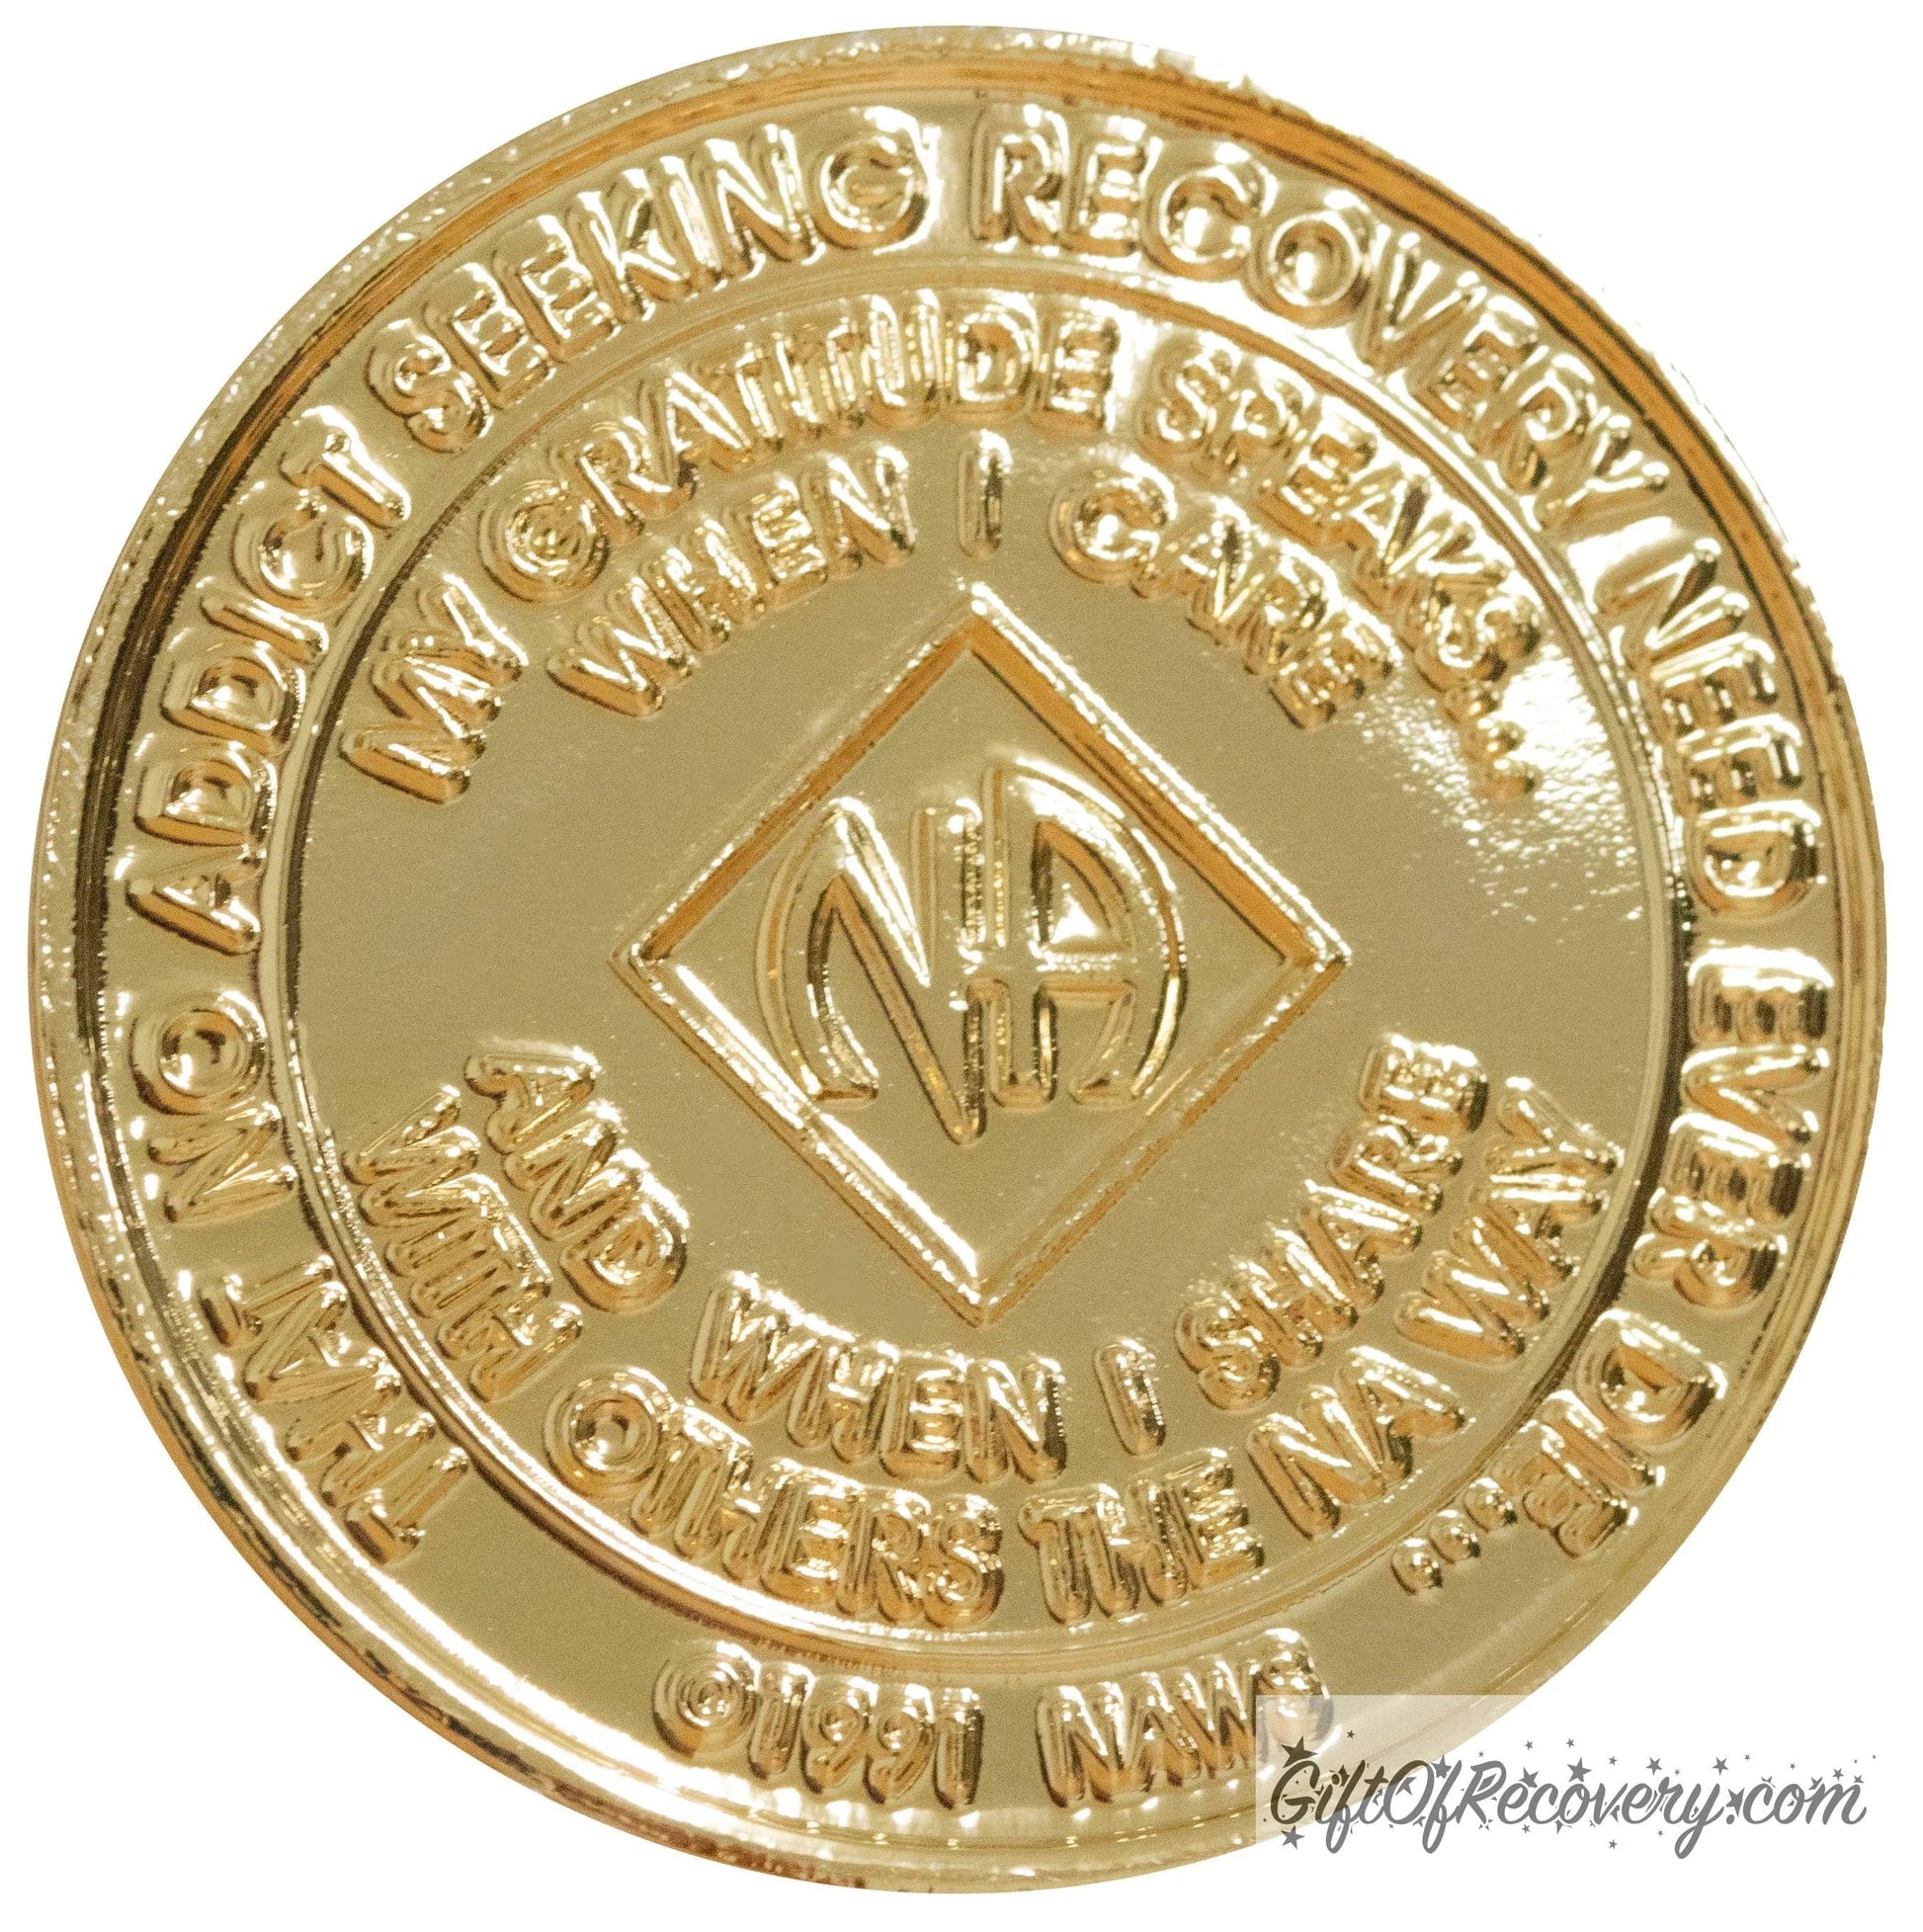 Clean Time Chip Narcotics Anonymous Gold with Diamond Shaped Crystal (Light Rose)